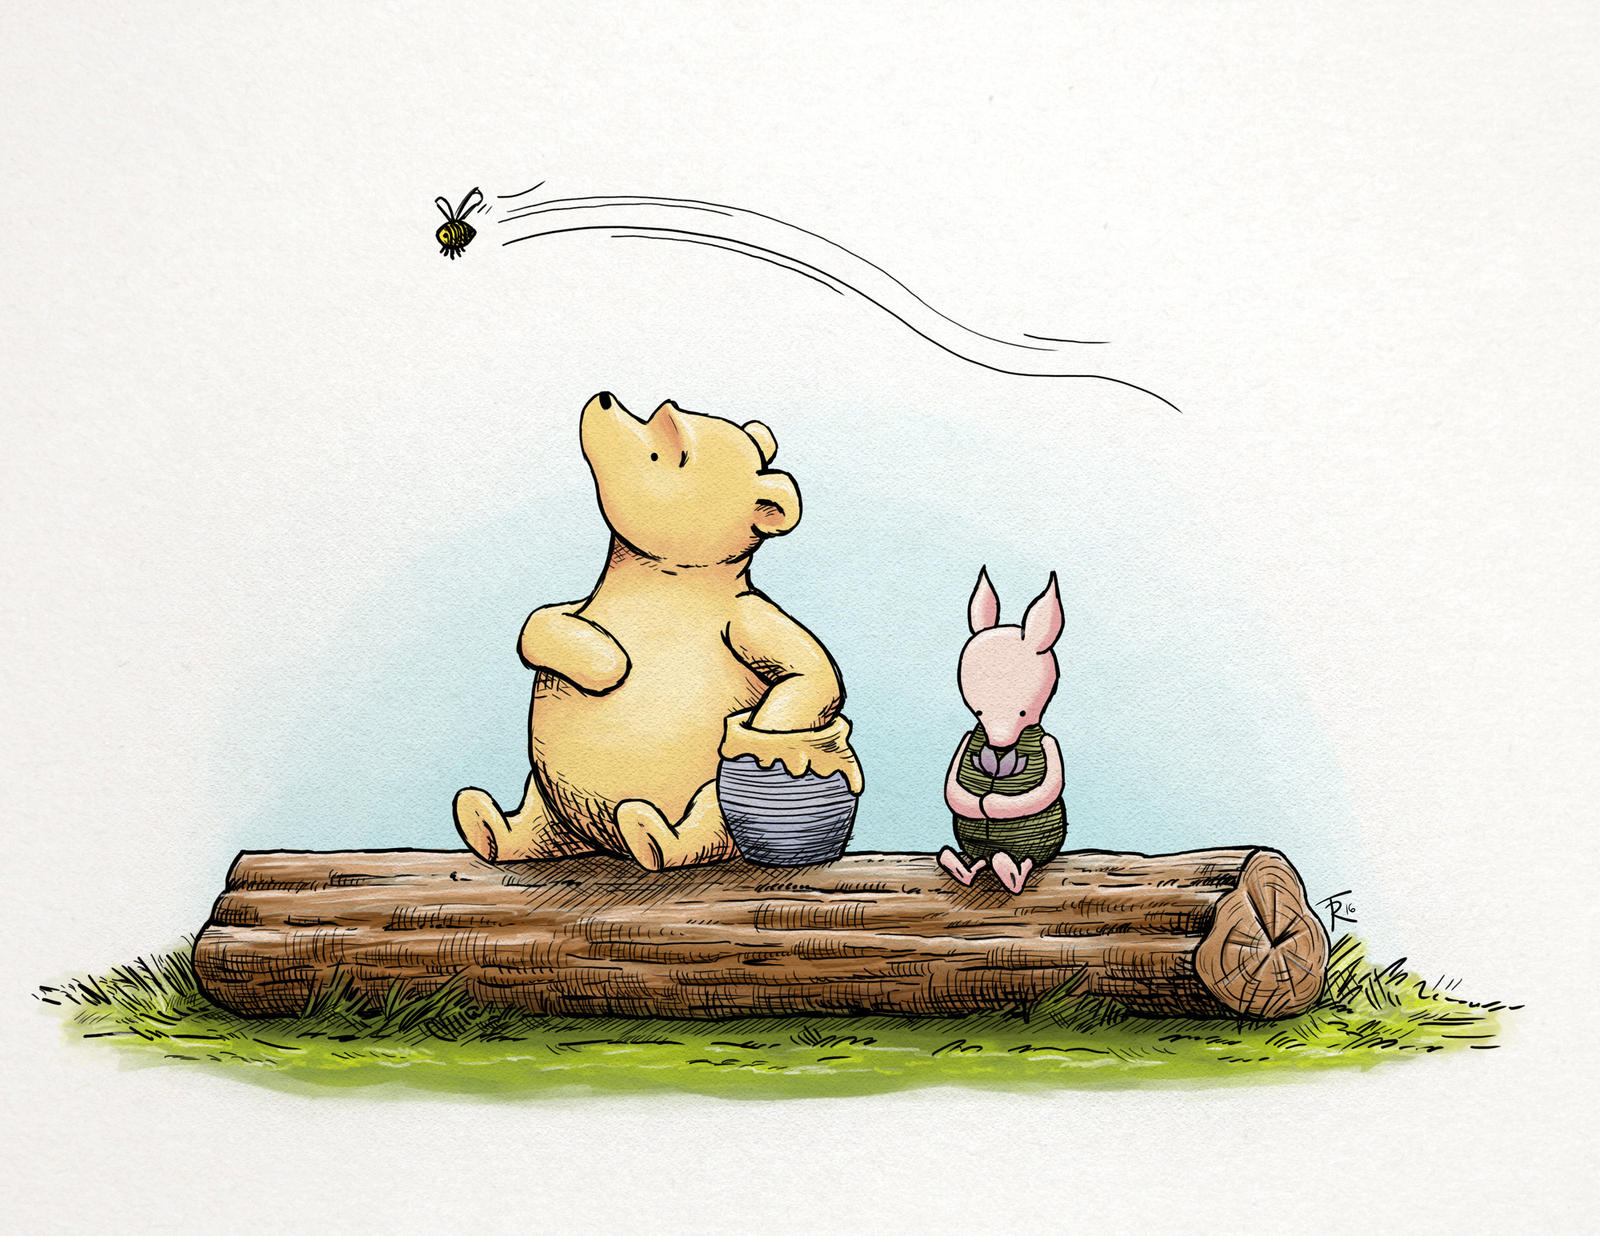 Download Classic Winnie the Pooh and Piglet by sphinkrink on DeviantArt